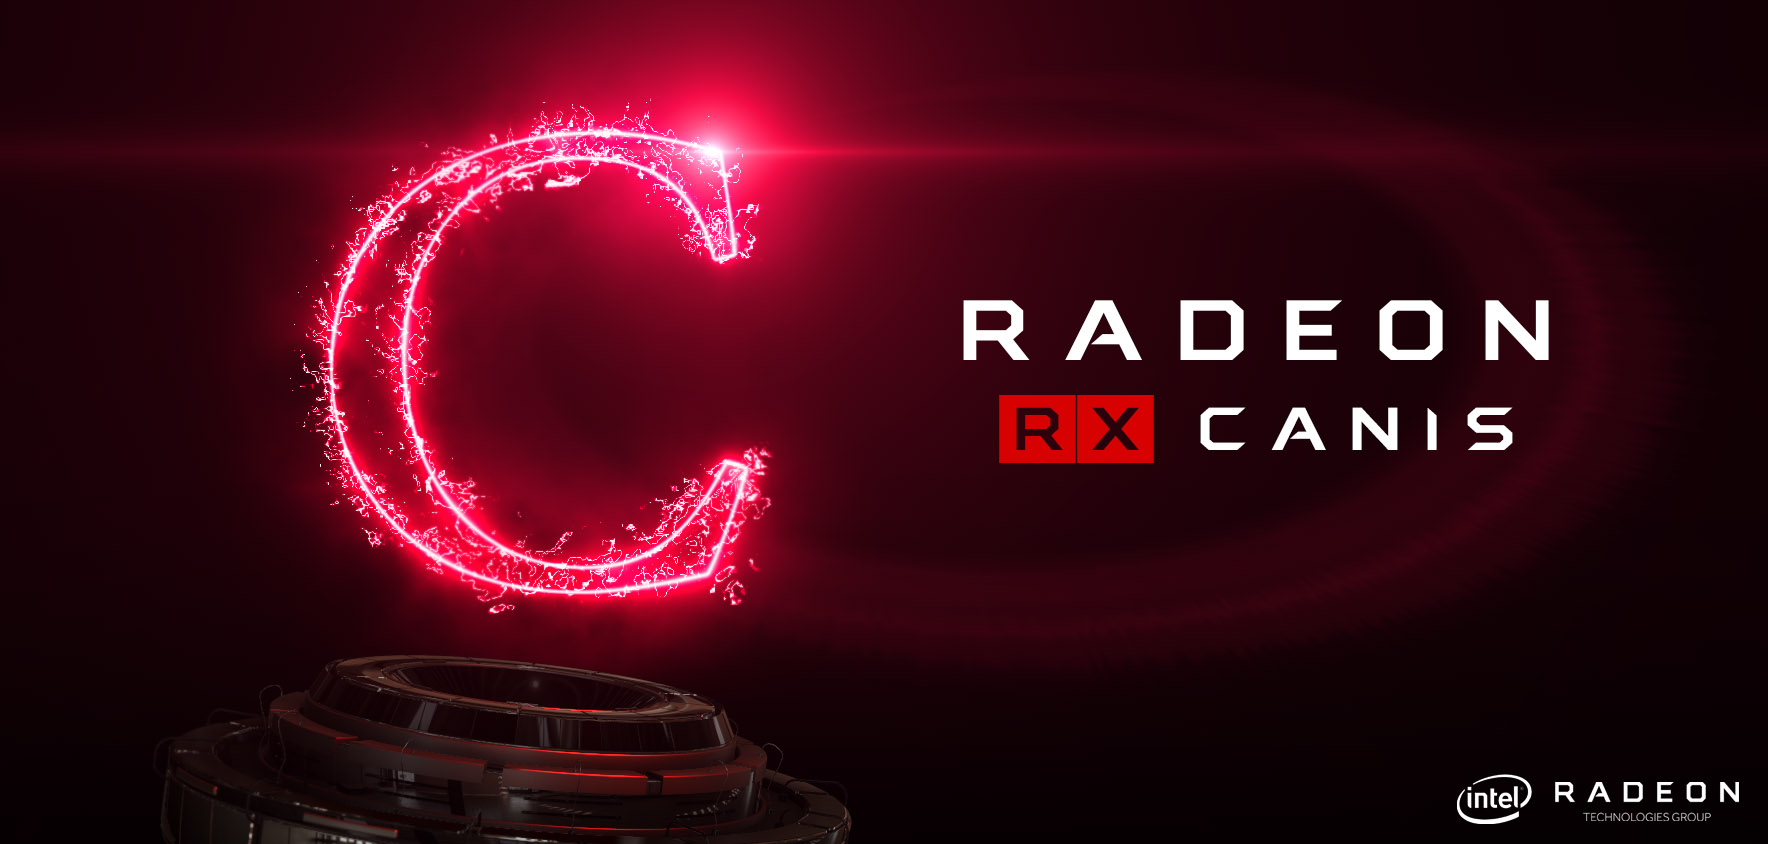 radeon-rx-canis-featured-image-1-1.jpg